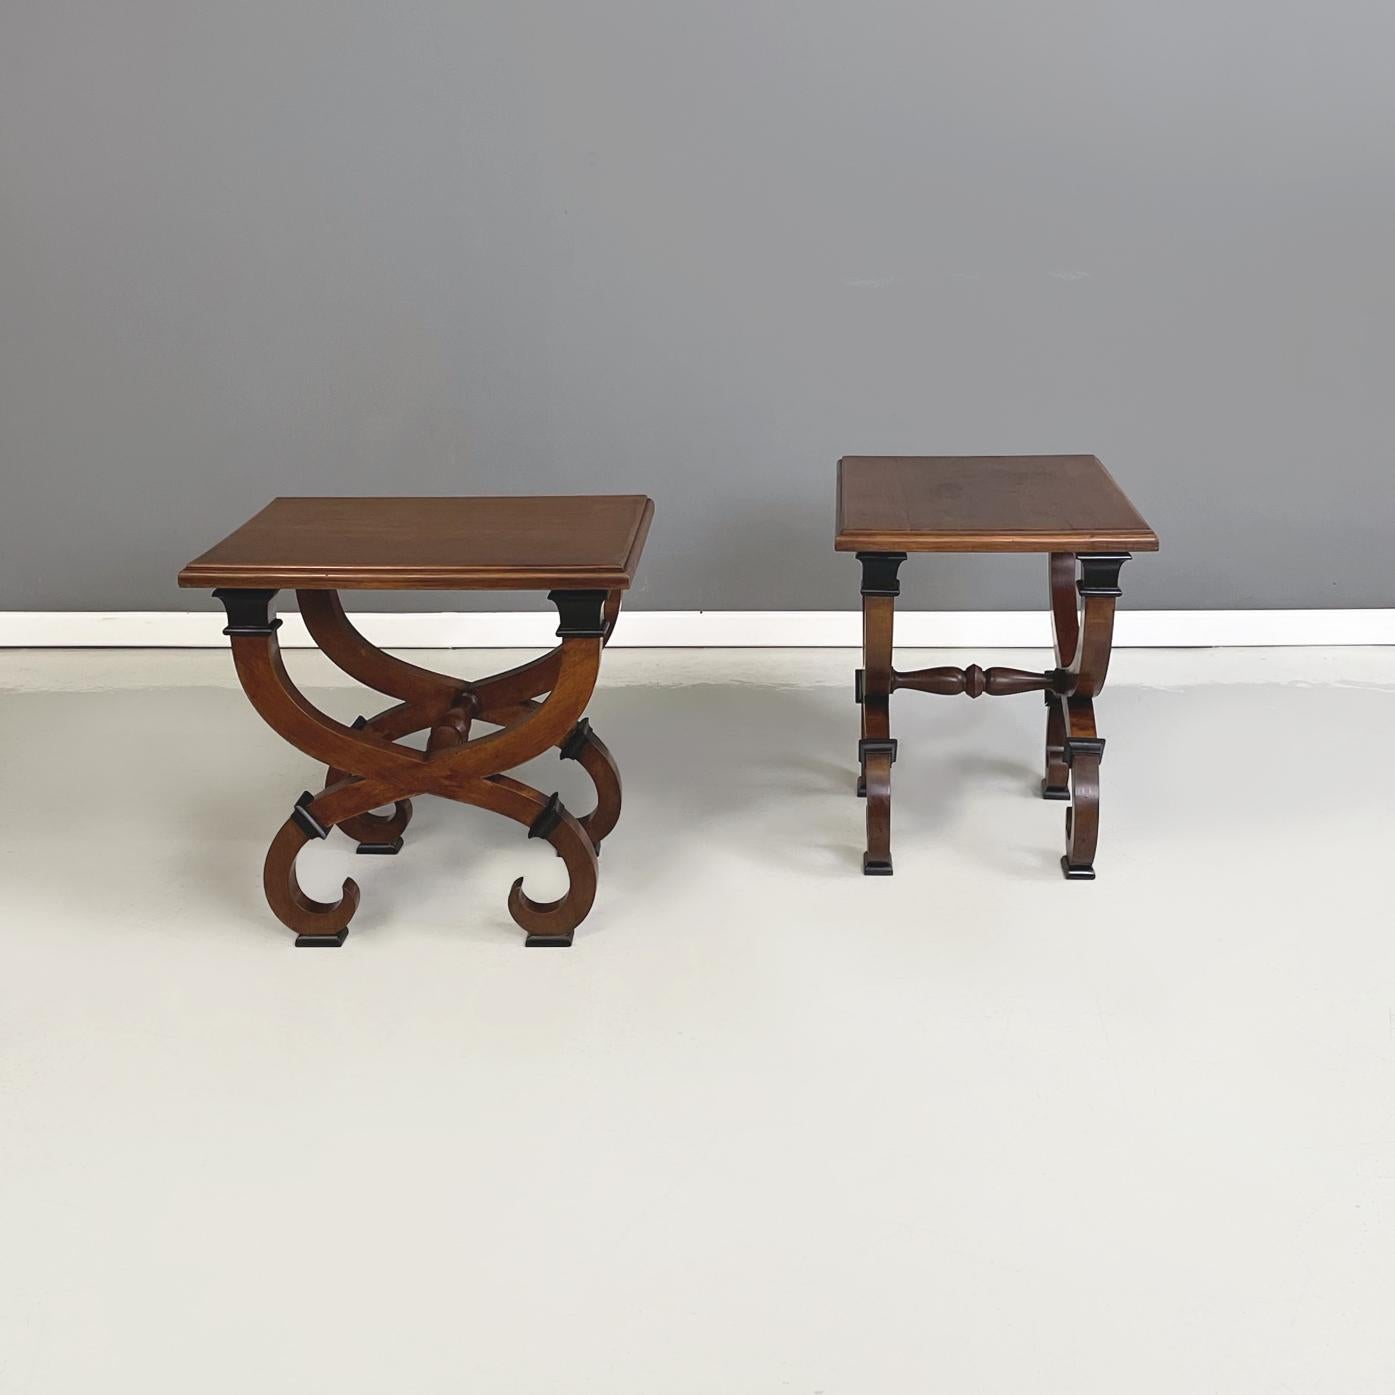 Italian mid-century Stools in finely crafted solid wood in Biedermeier style, 1950s
Stools with rectangular seat, entirely in solid wood. The finely crafted paws feature black painted wooden details. The legs cross in the middle and have curled